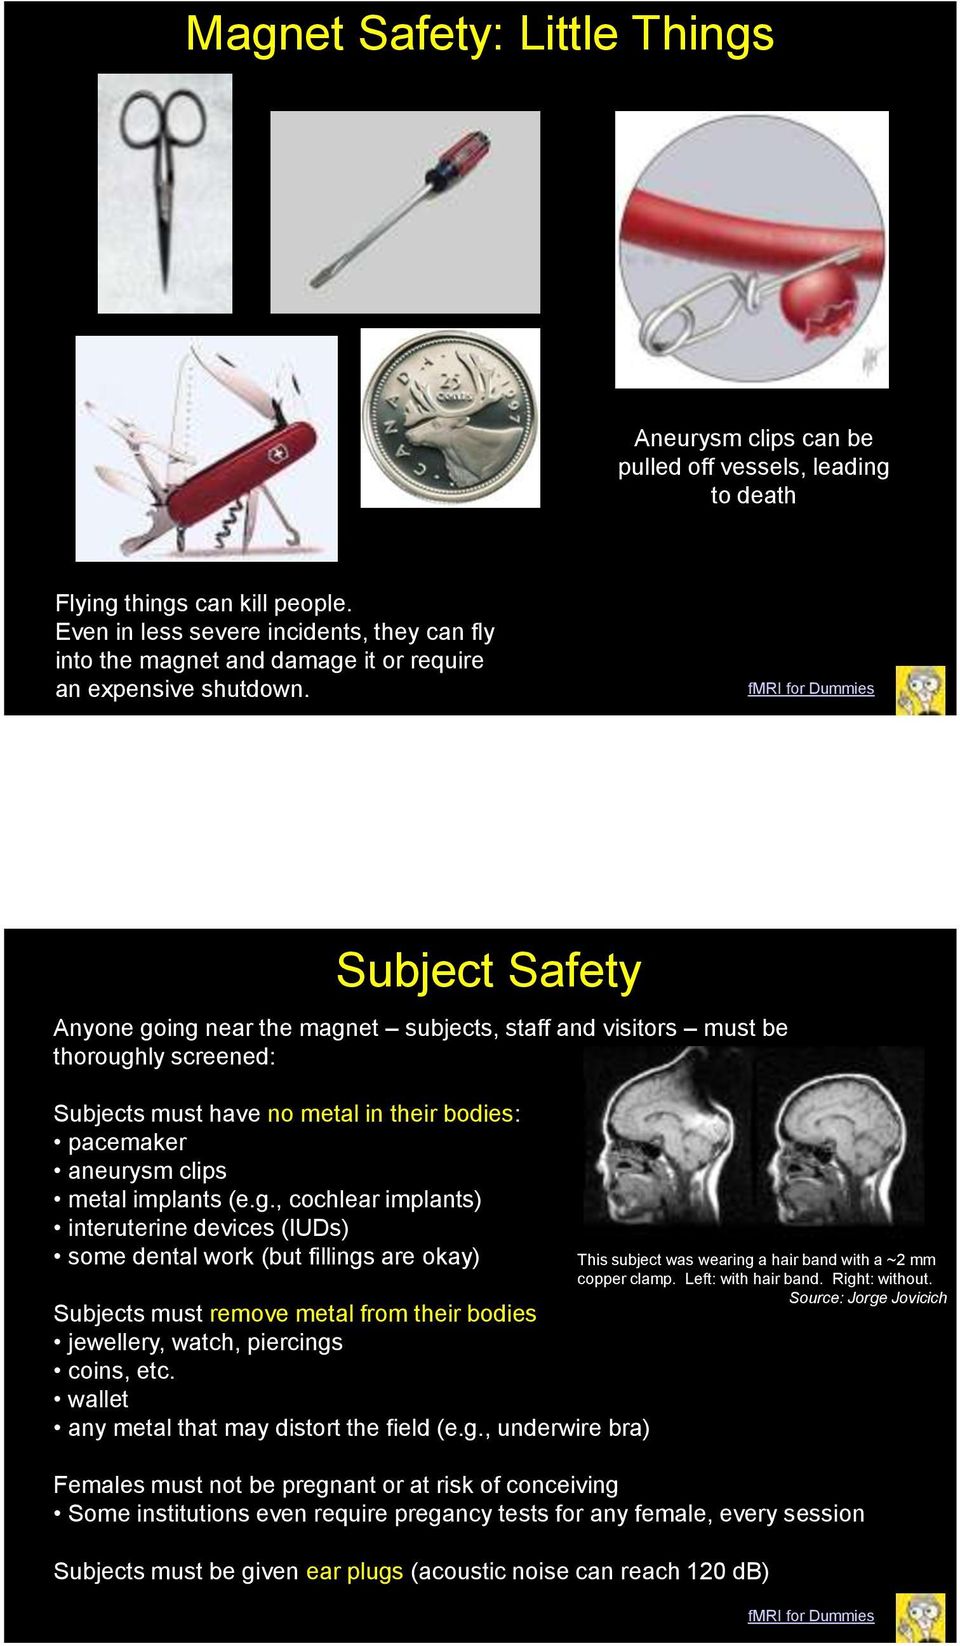 fmri for Dummies Subject Safety Anyone going near the magnet subjects, staff and visitors must be thoroughly screened: Subjects must have no metal in their bodies: pacemaker aneurysm clips metal